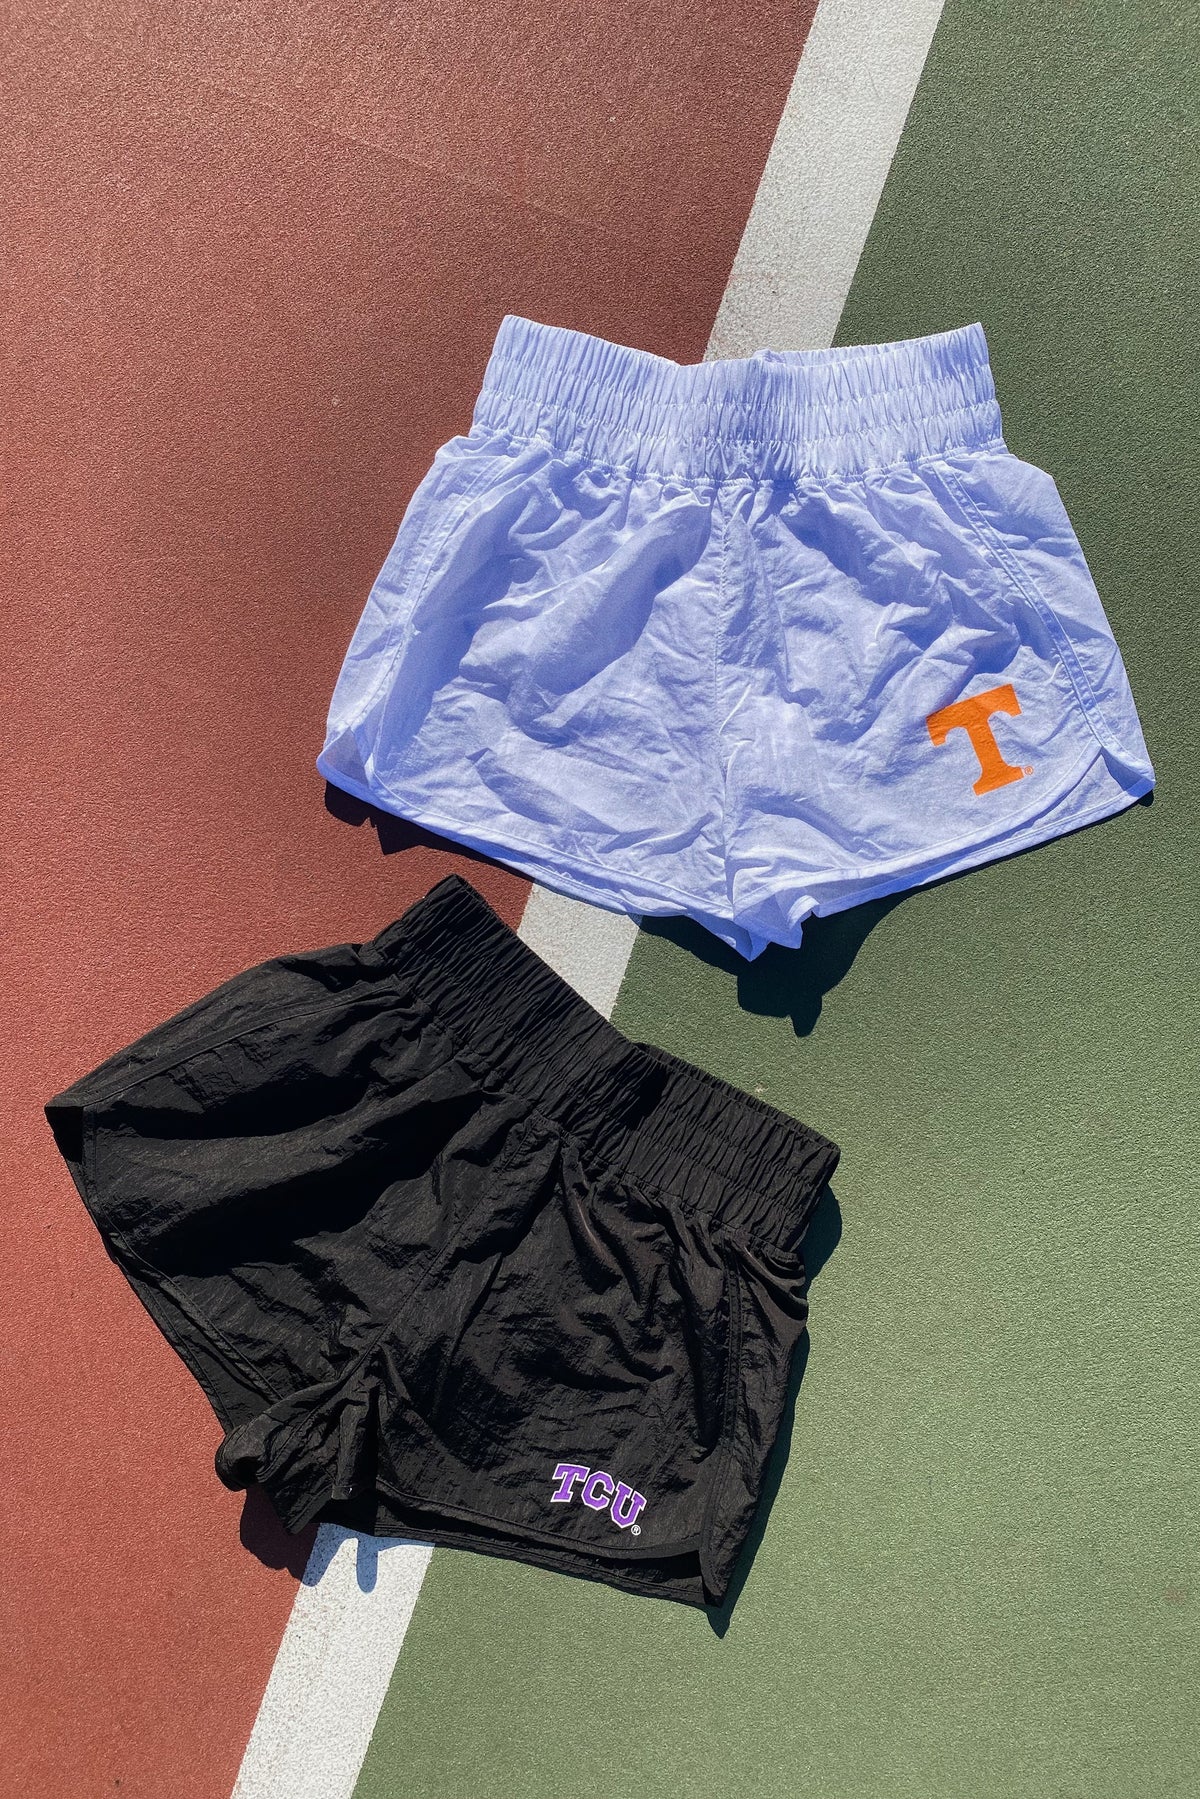 University of Tennessee Boxer Short